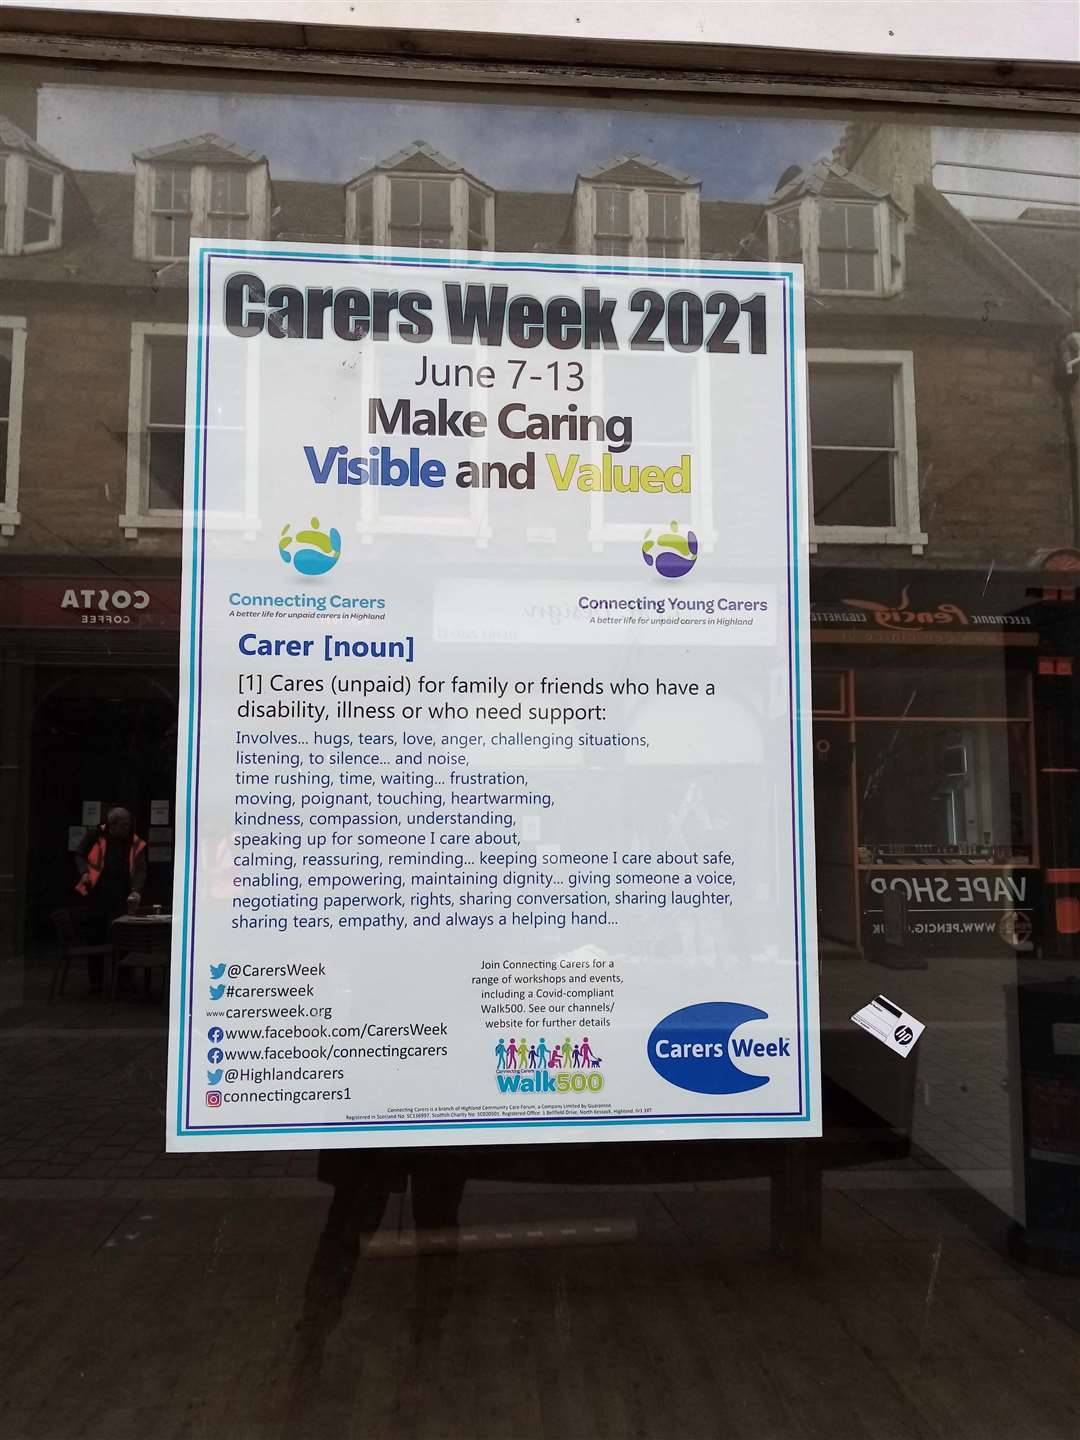 A Carers Week poster.